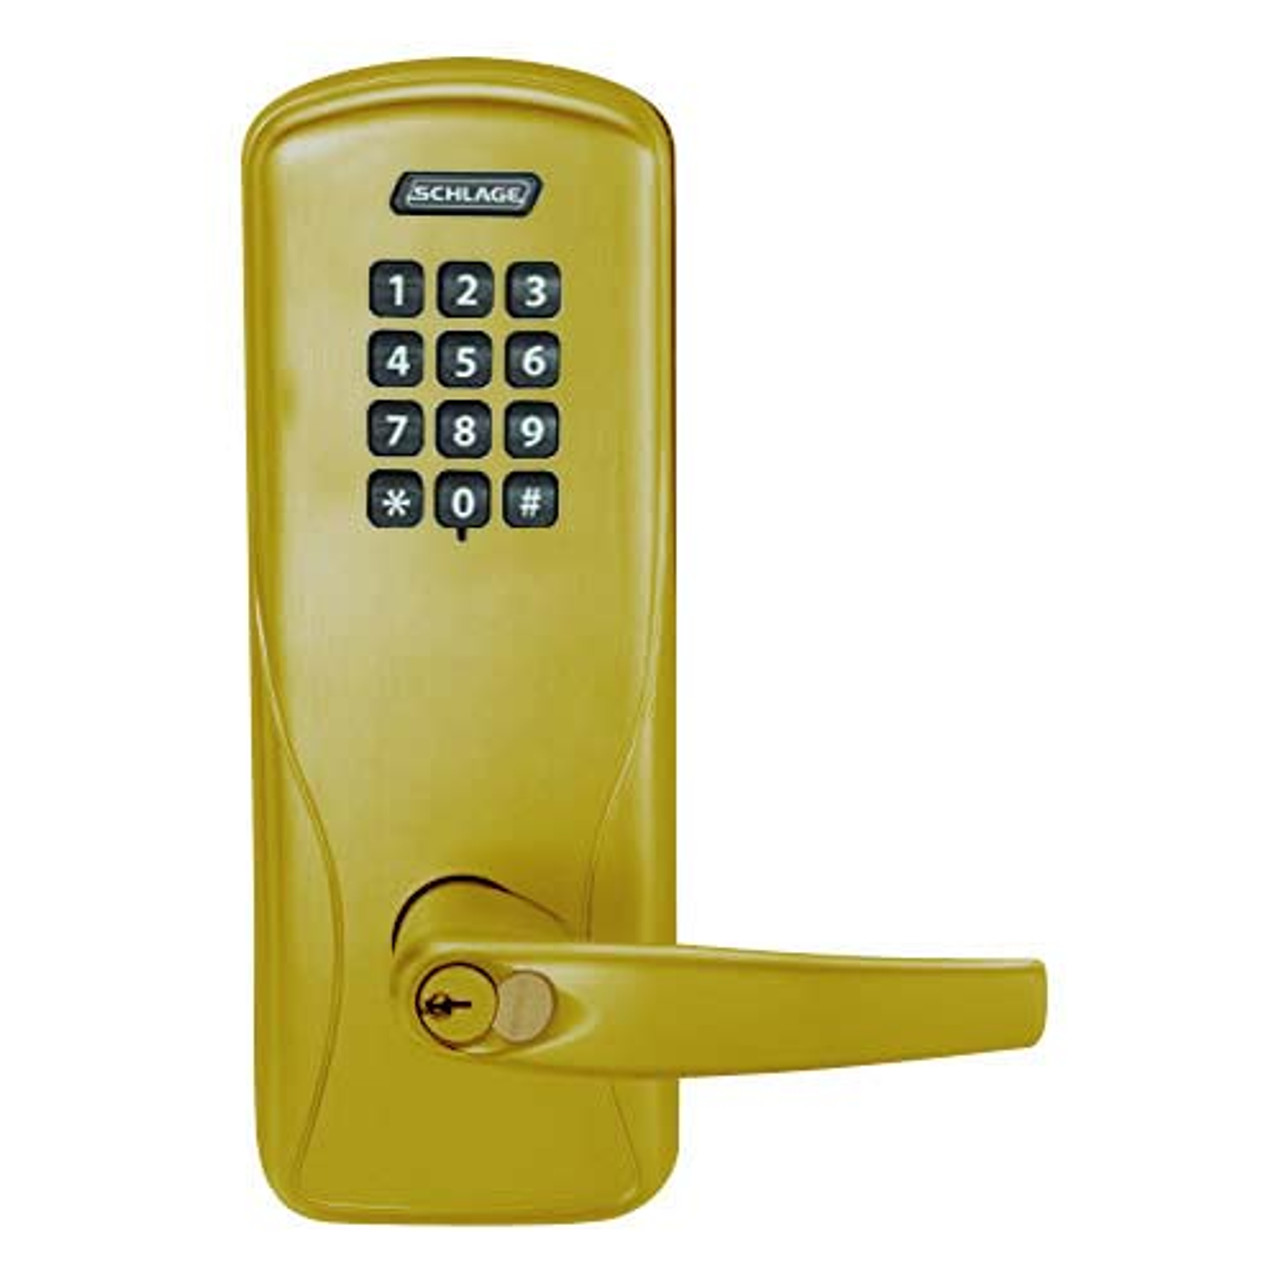 CO100-MS-70-KP-ATH-GD-29R-606 Schlage Standalone Mortise Electronic Keypad locks in Satin Brass